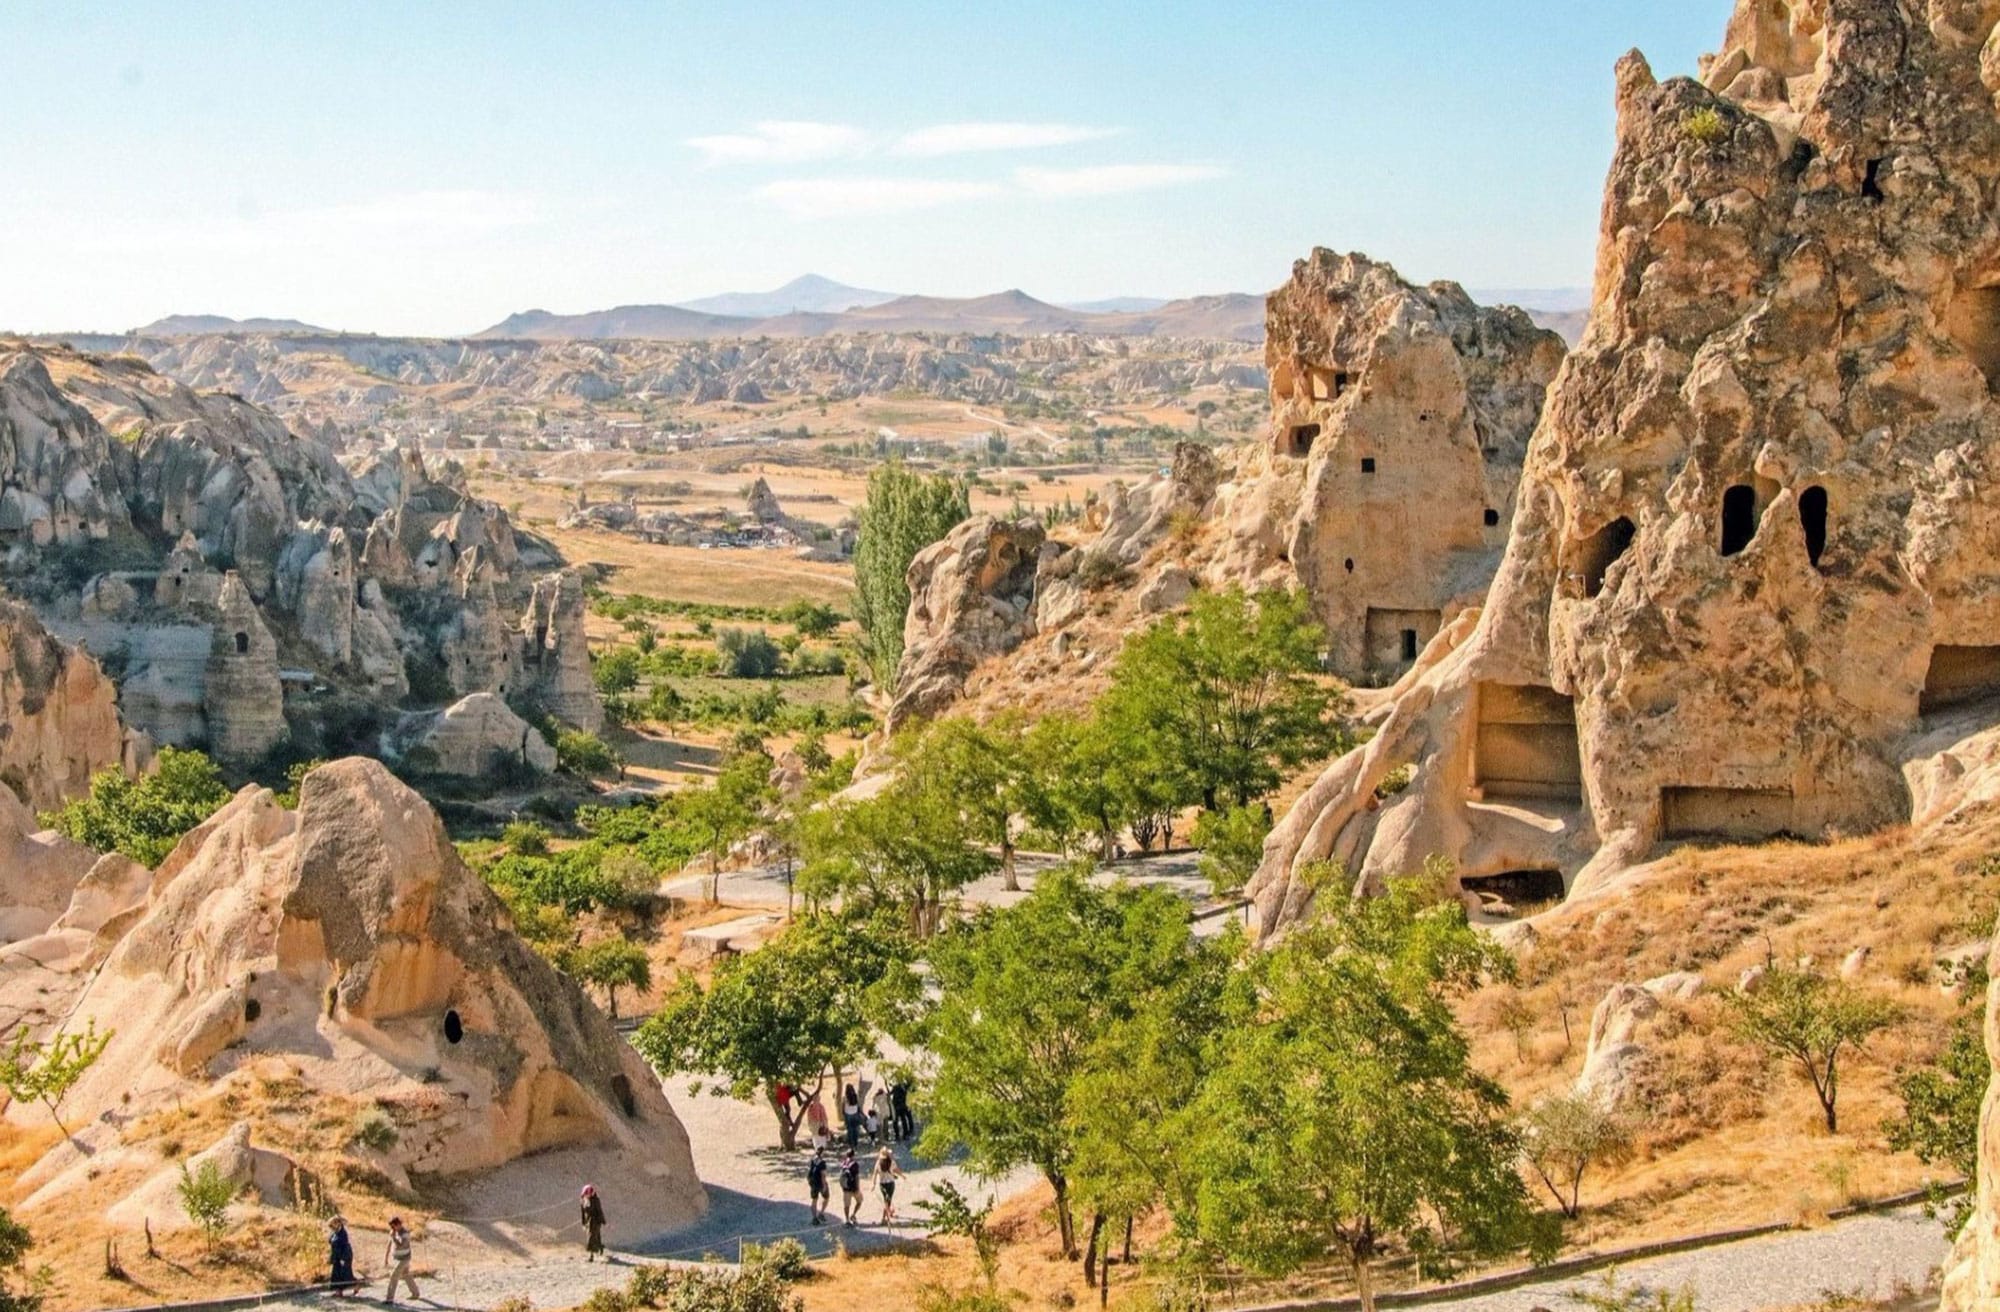 Days Cappadocia Tour From Istanbul By Plane